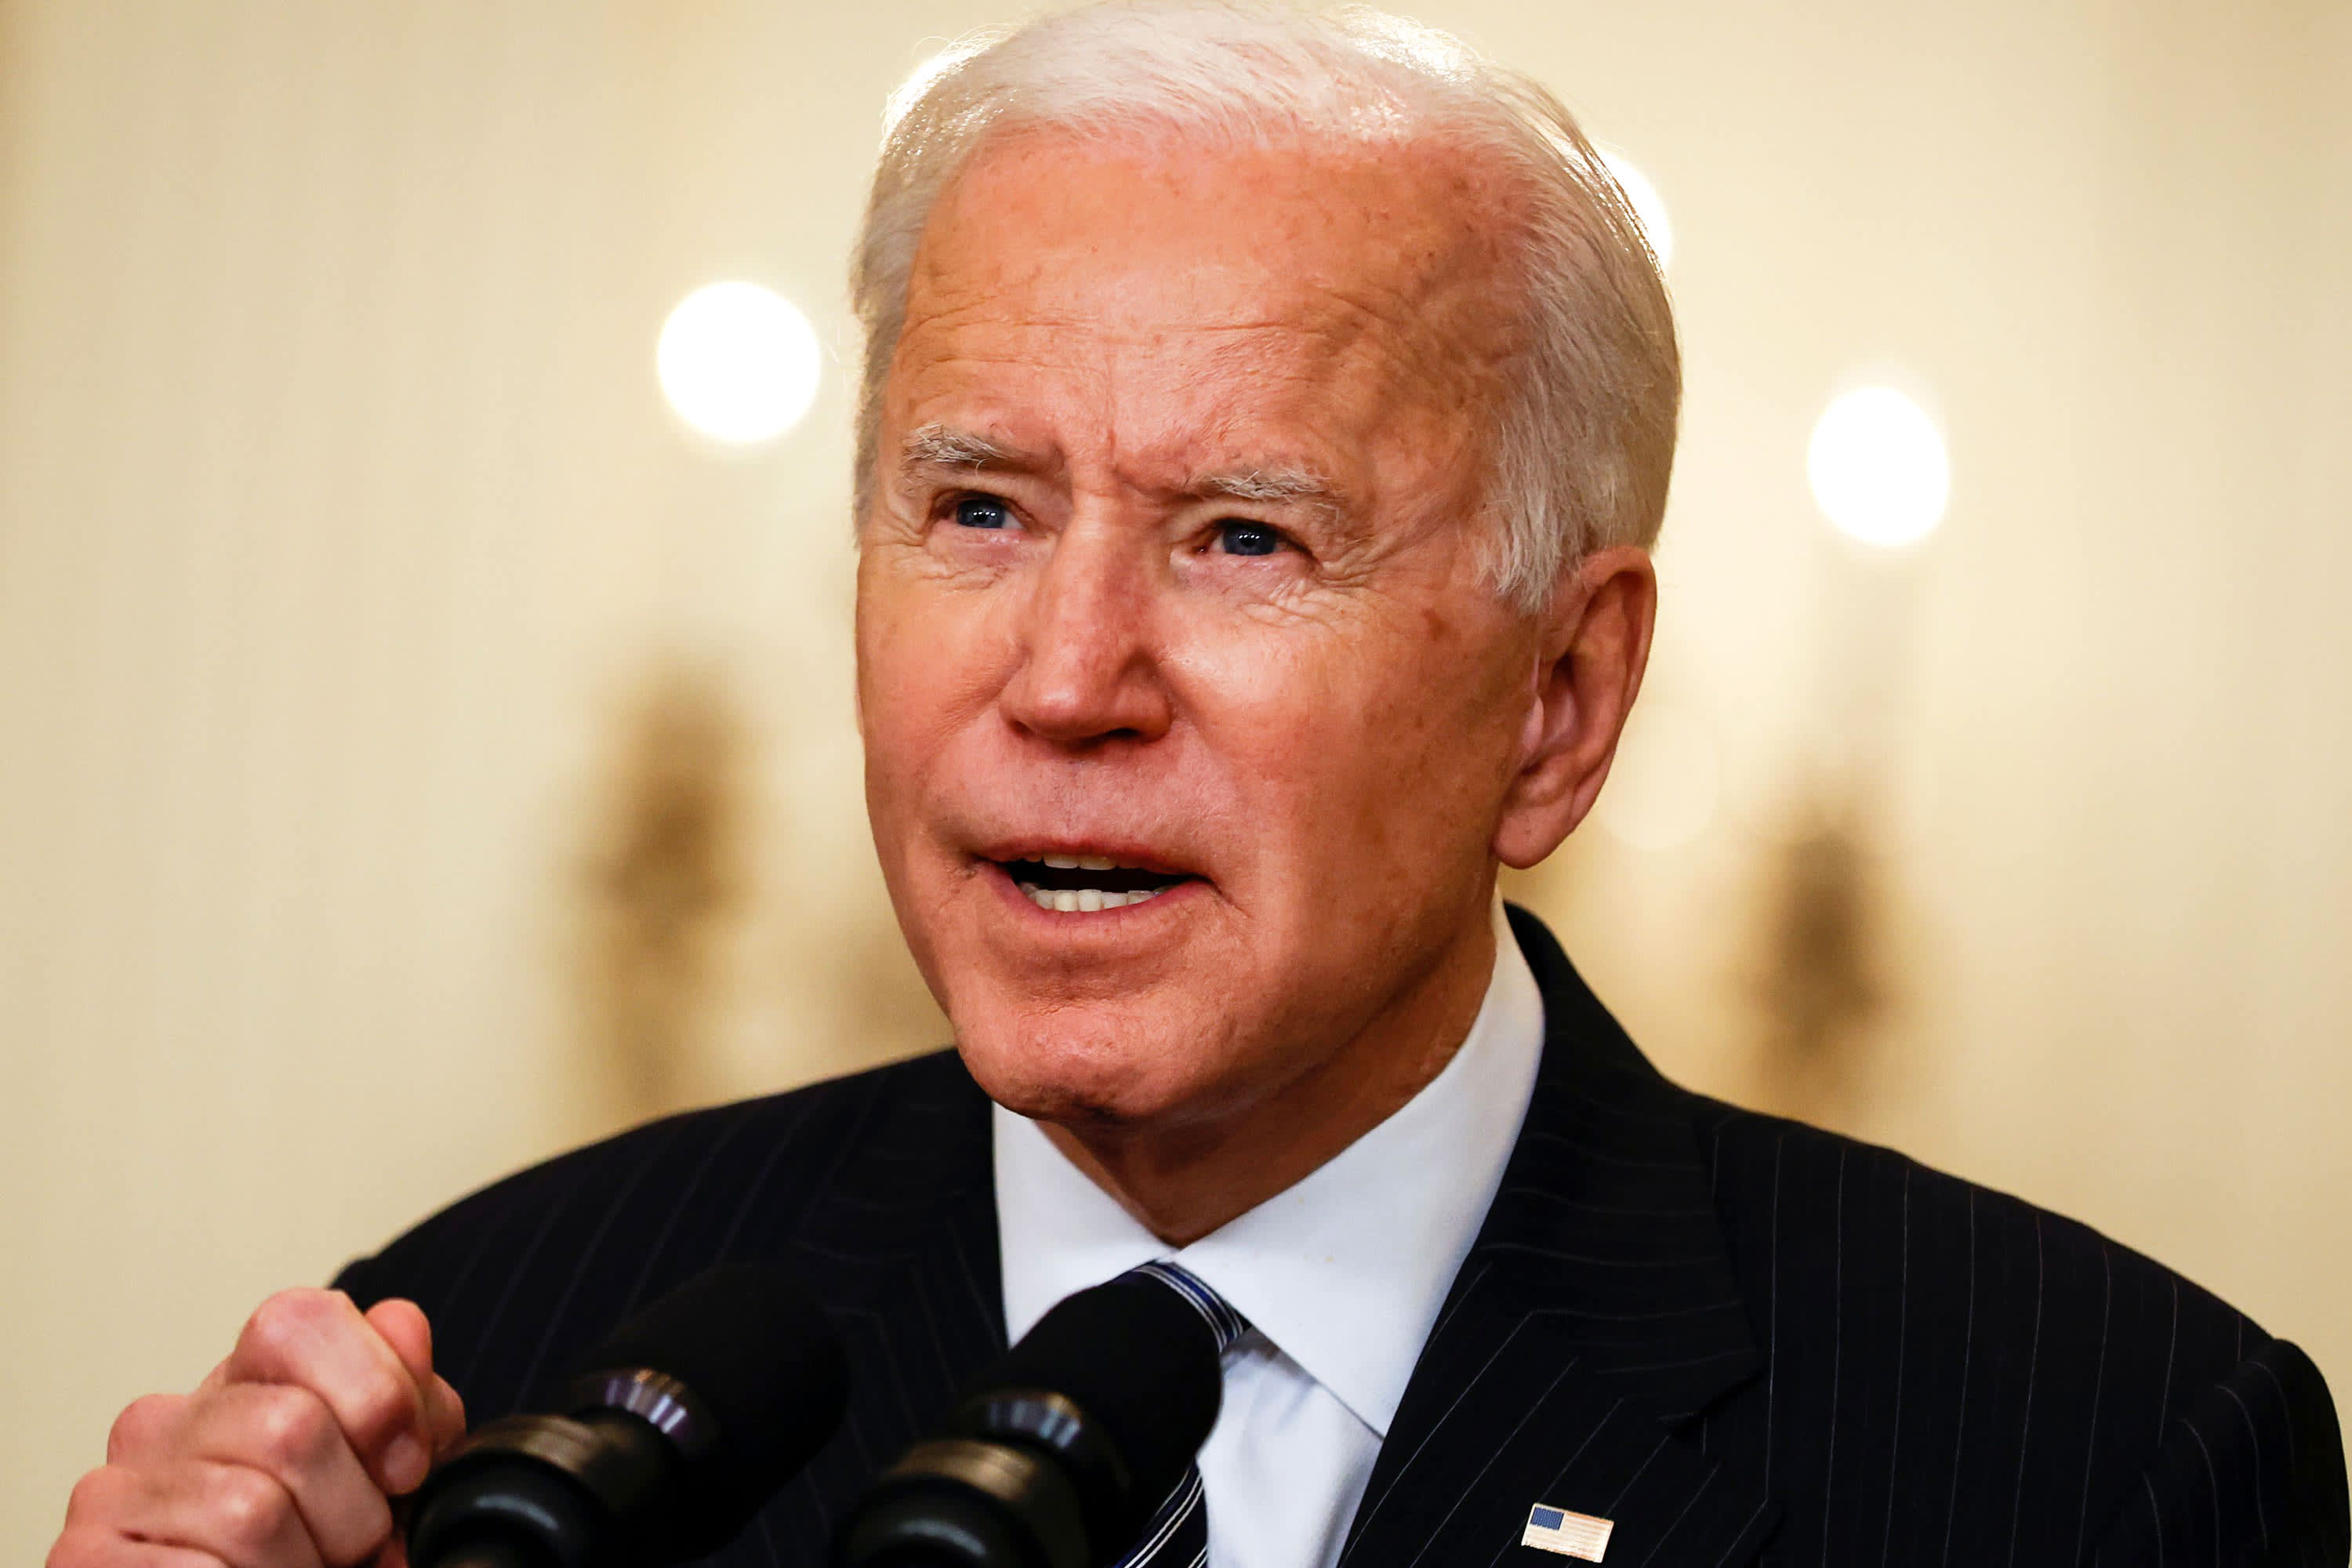 Biden’s closest advisers have ties to large companies, some of which earn millions